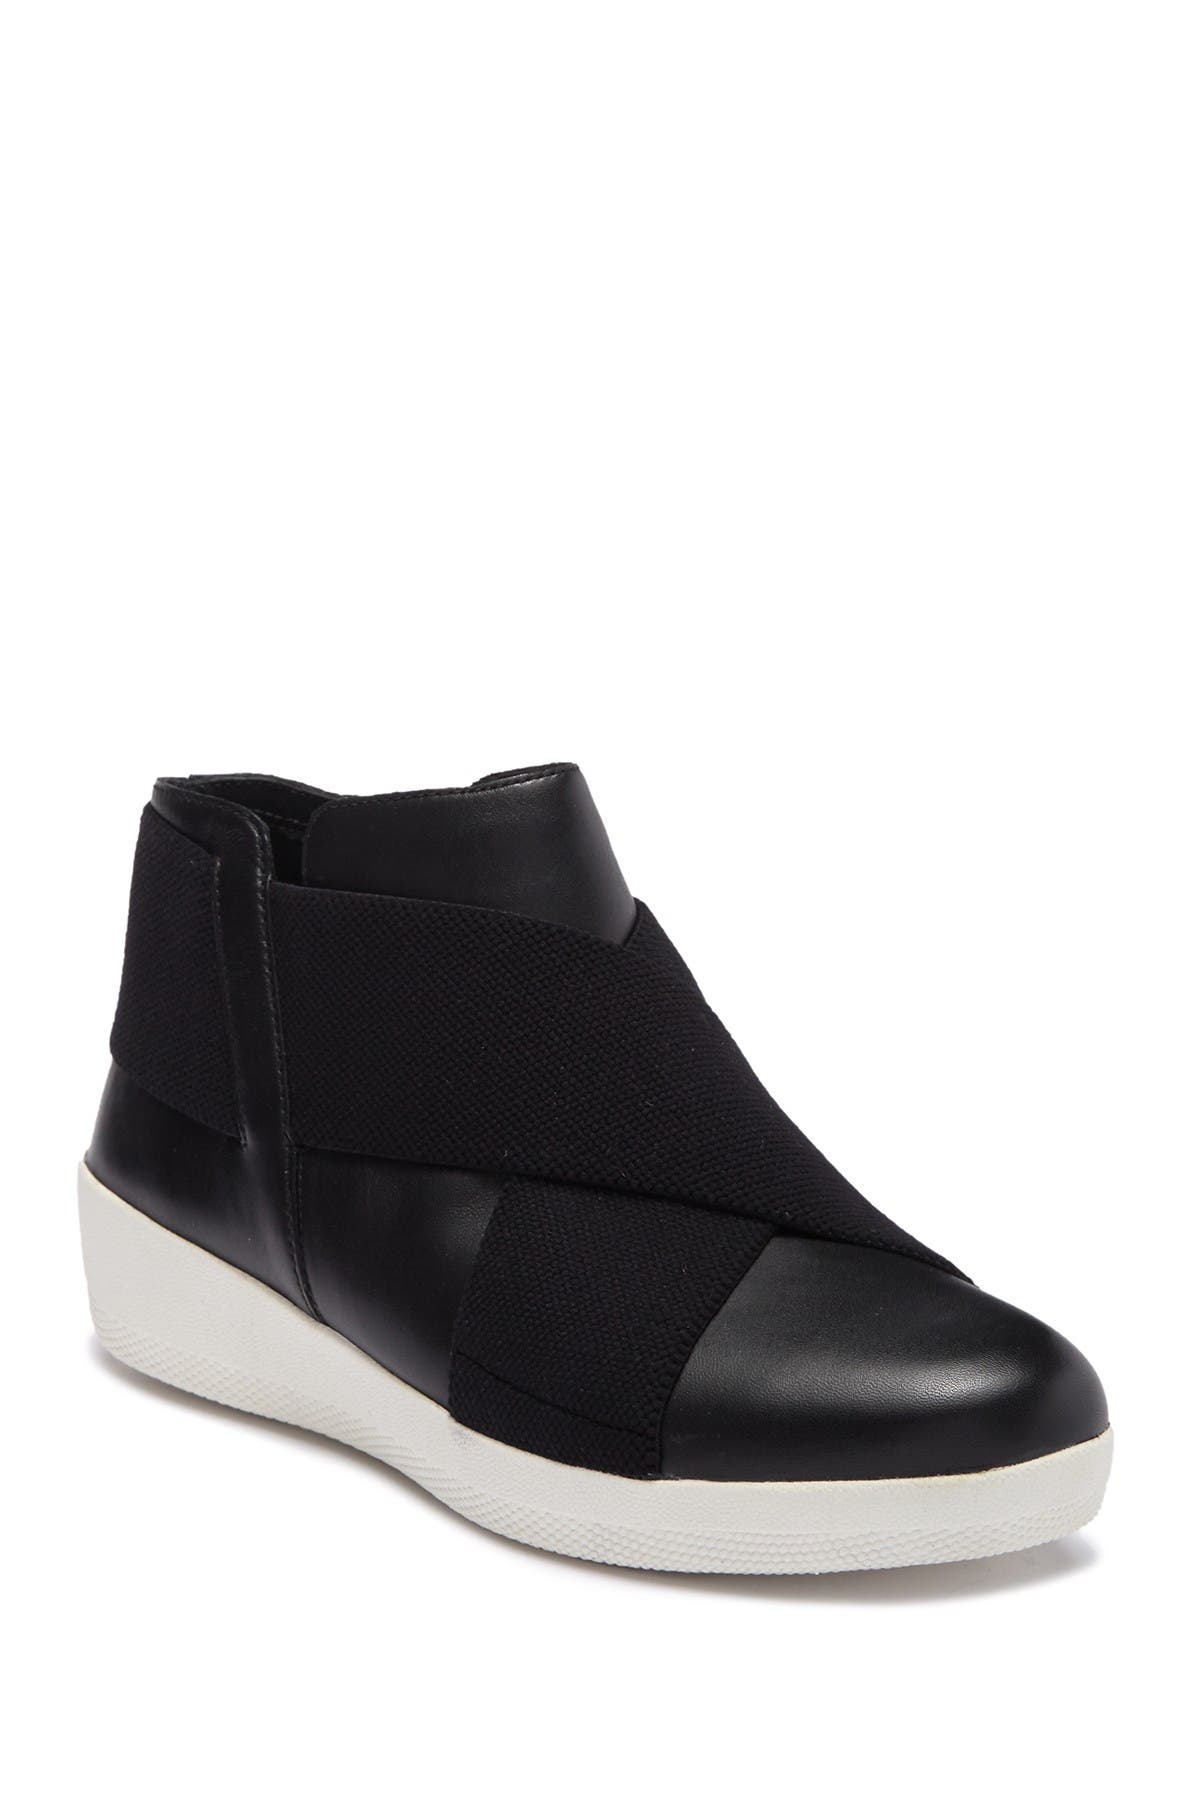 fitflop superflex ankle boots